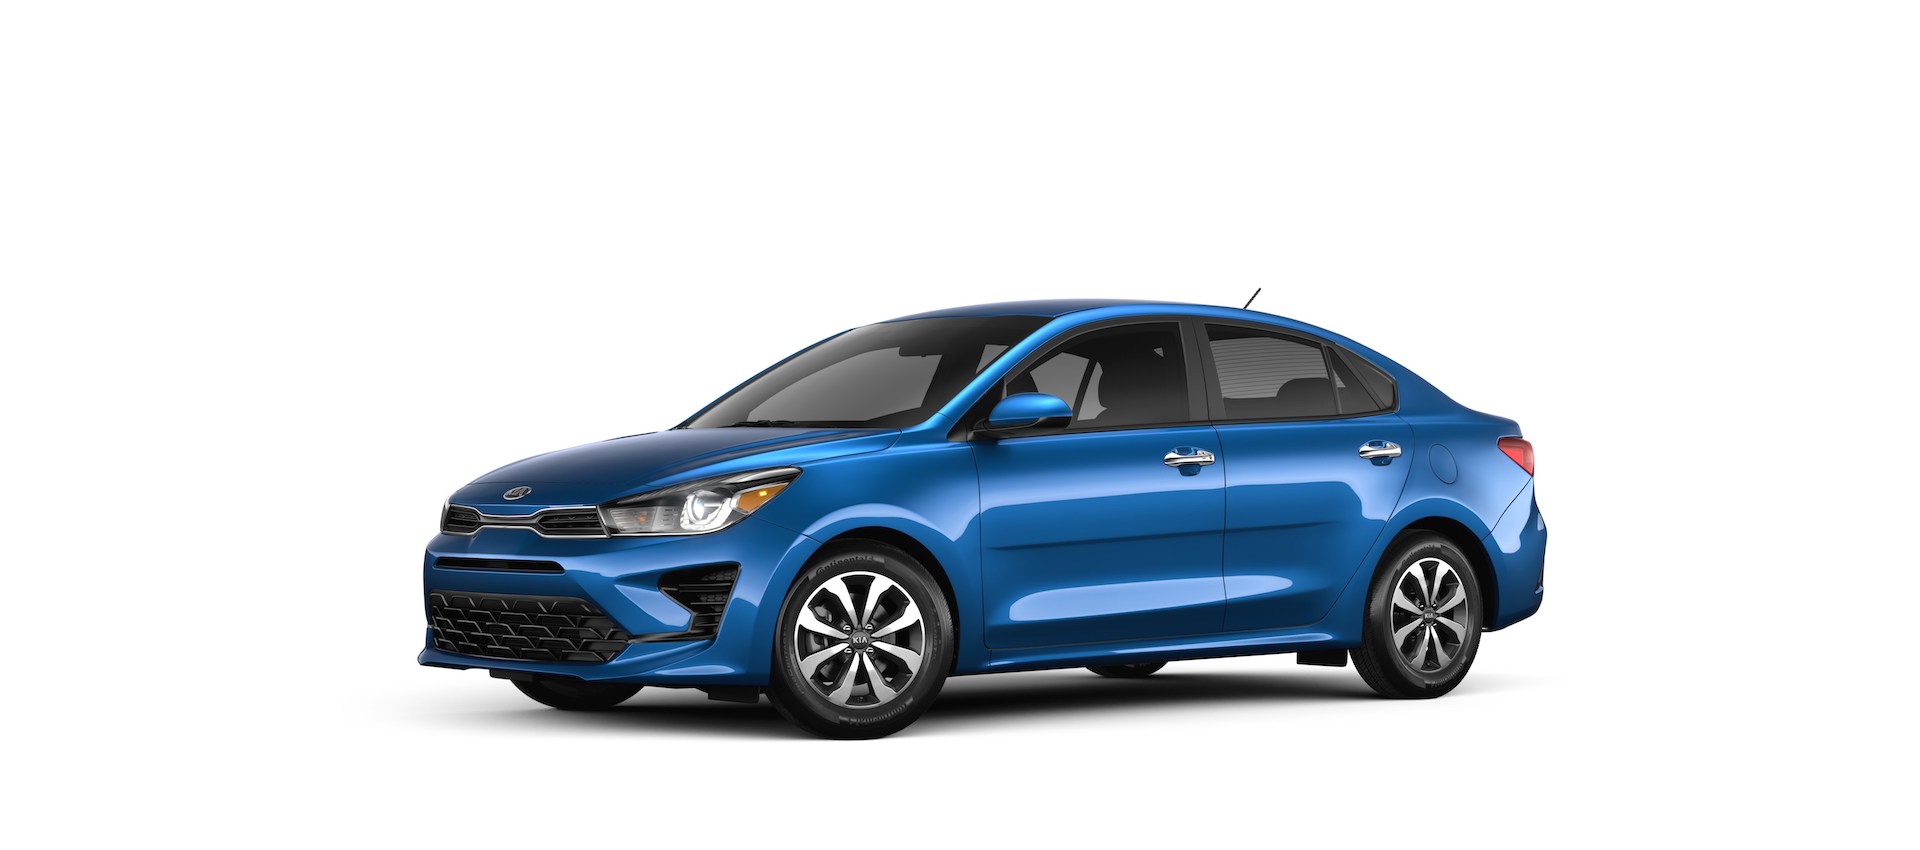 New And Used Kia Rio Prices Photos Reviews Specs The Car Connection